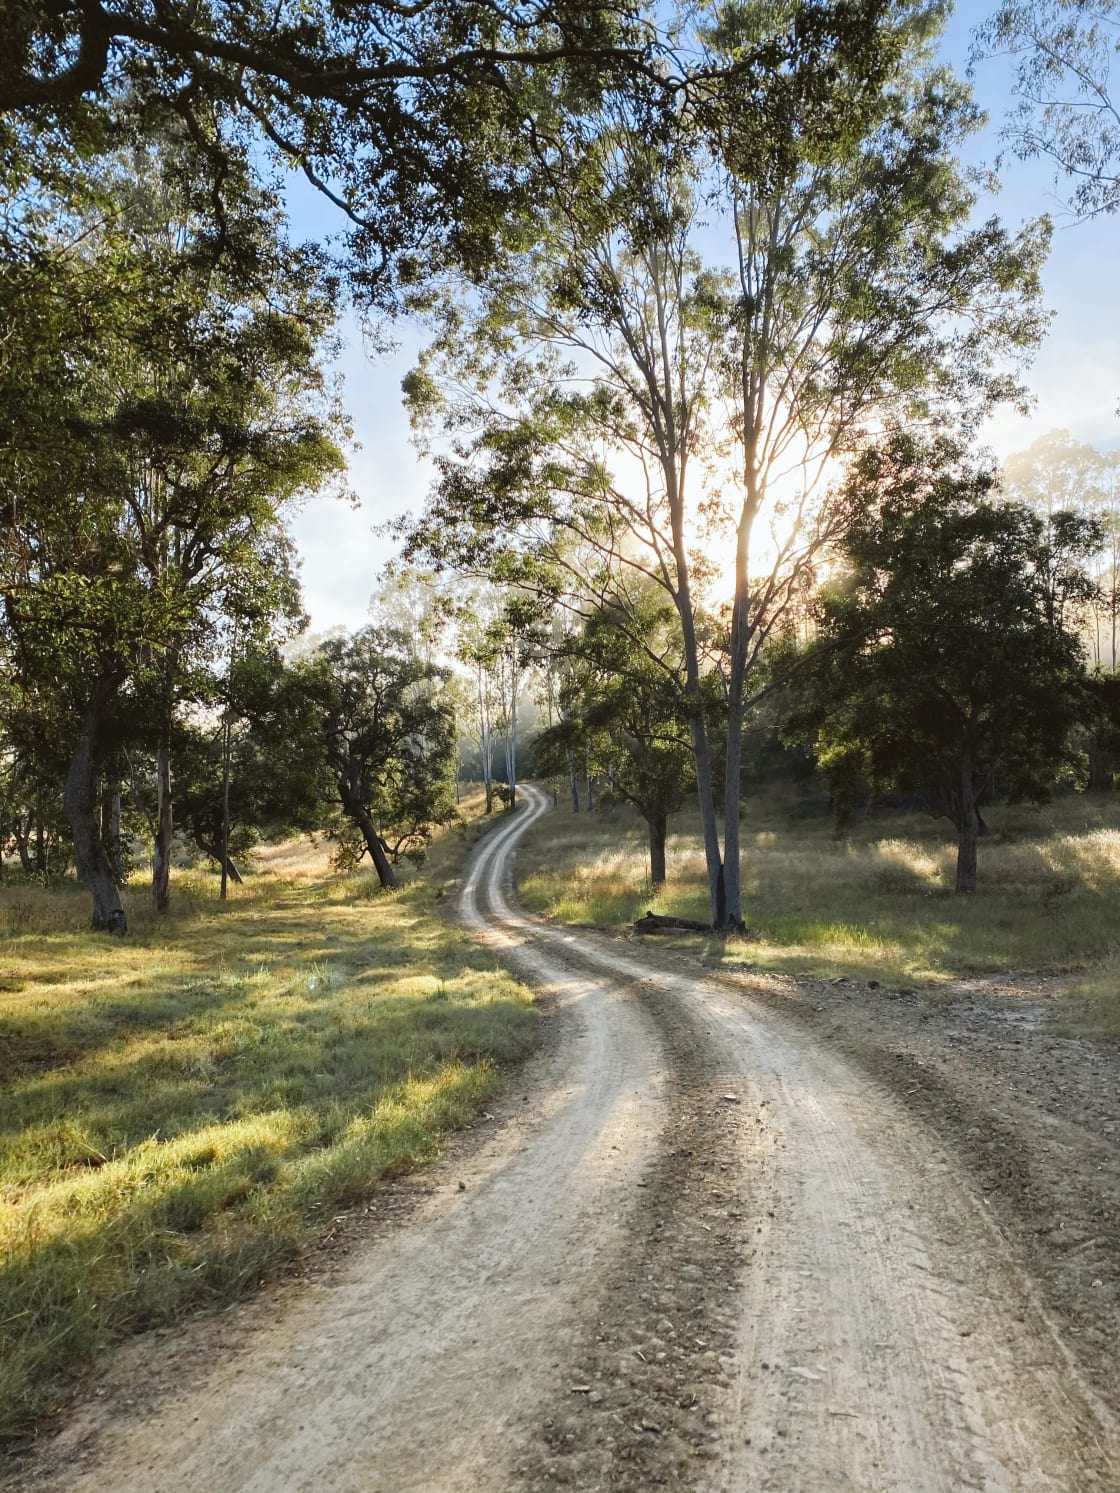 Explore the tracks on our property - 4wd needed however only 2wd needed to enter the campground